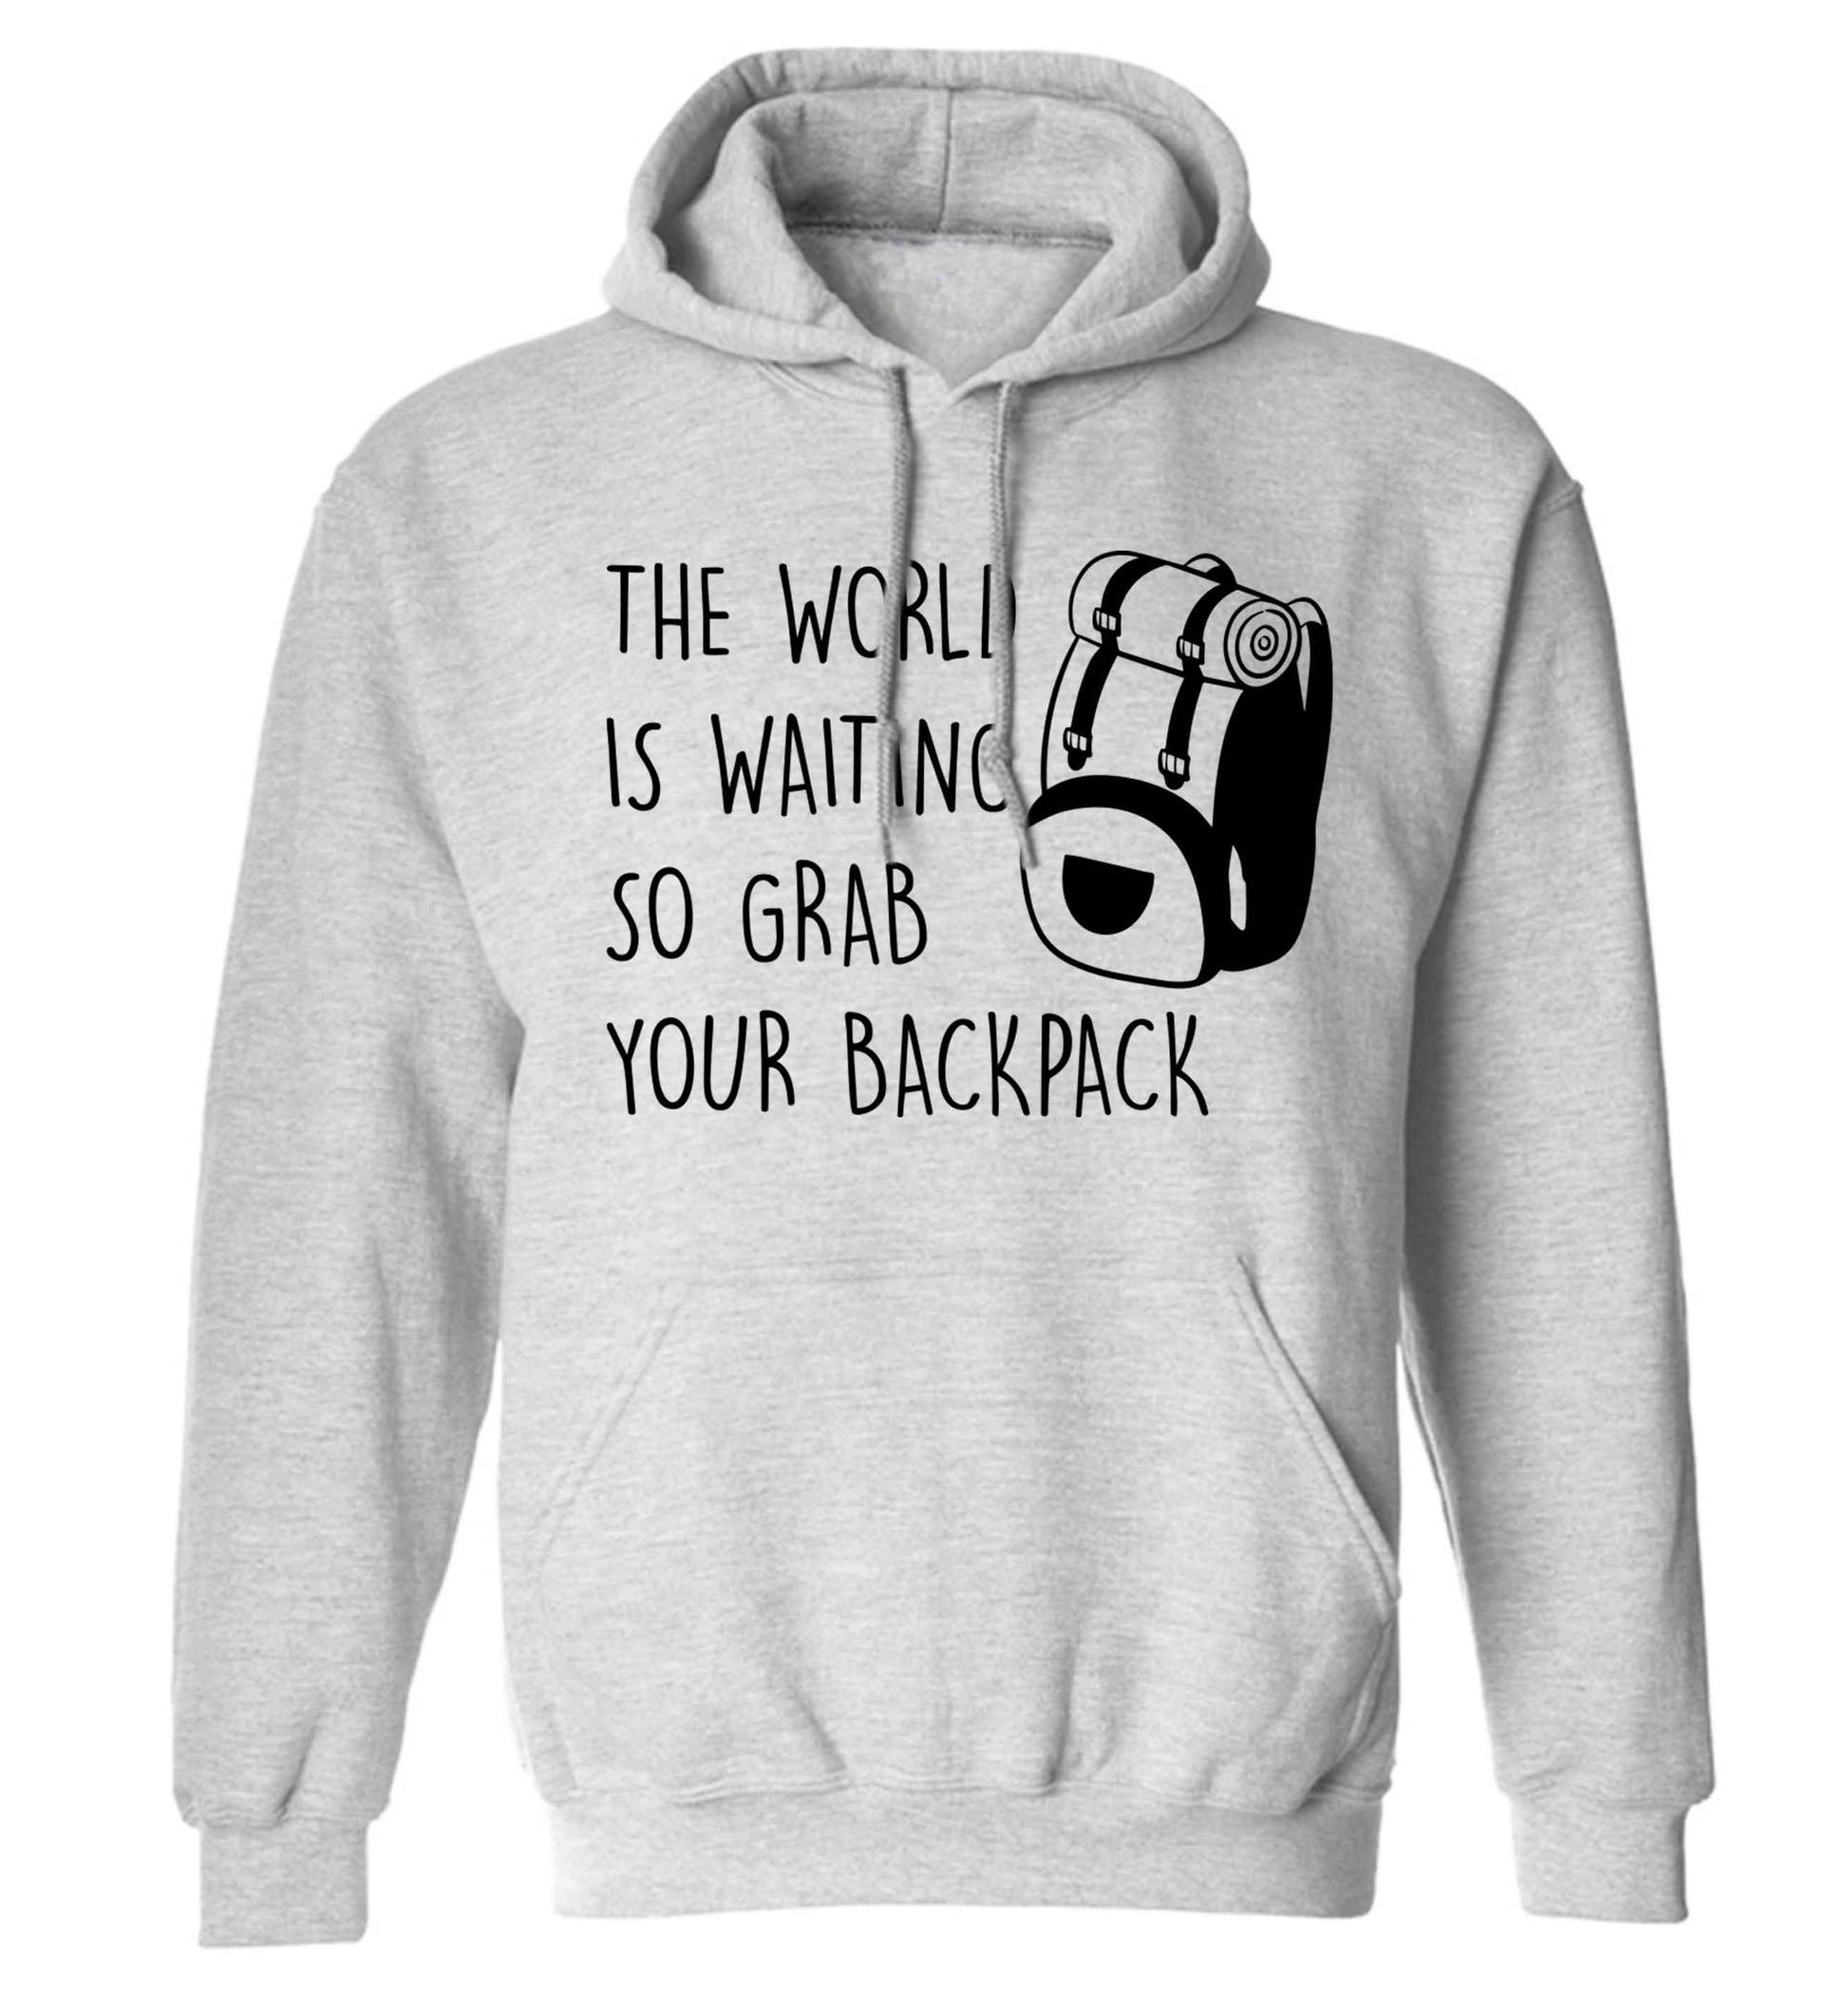 The world is waiting so grab your backpack adults unisex grey hoodie 2XL